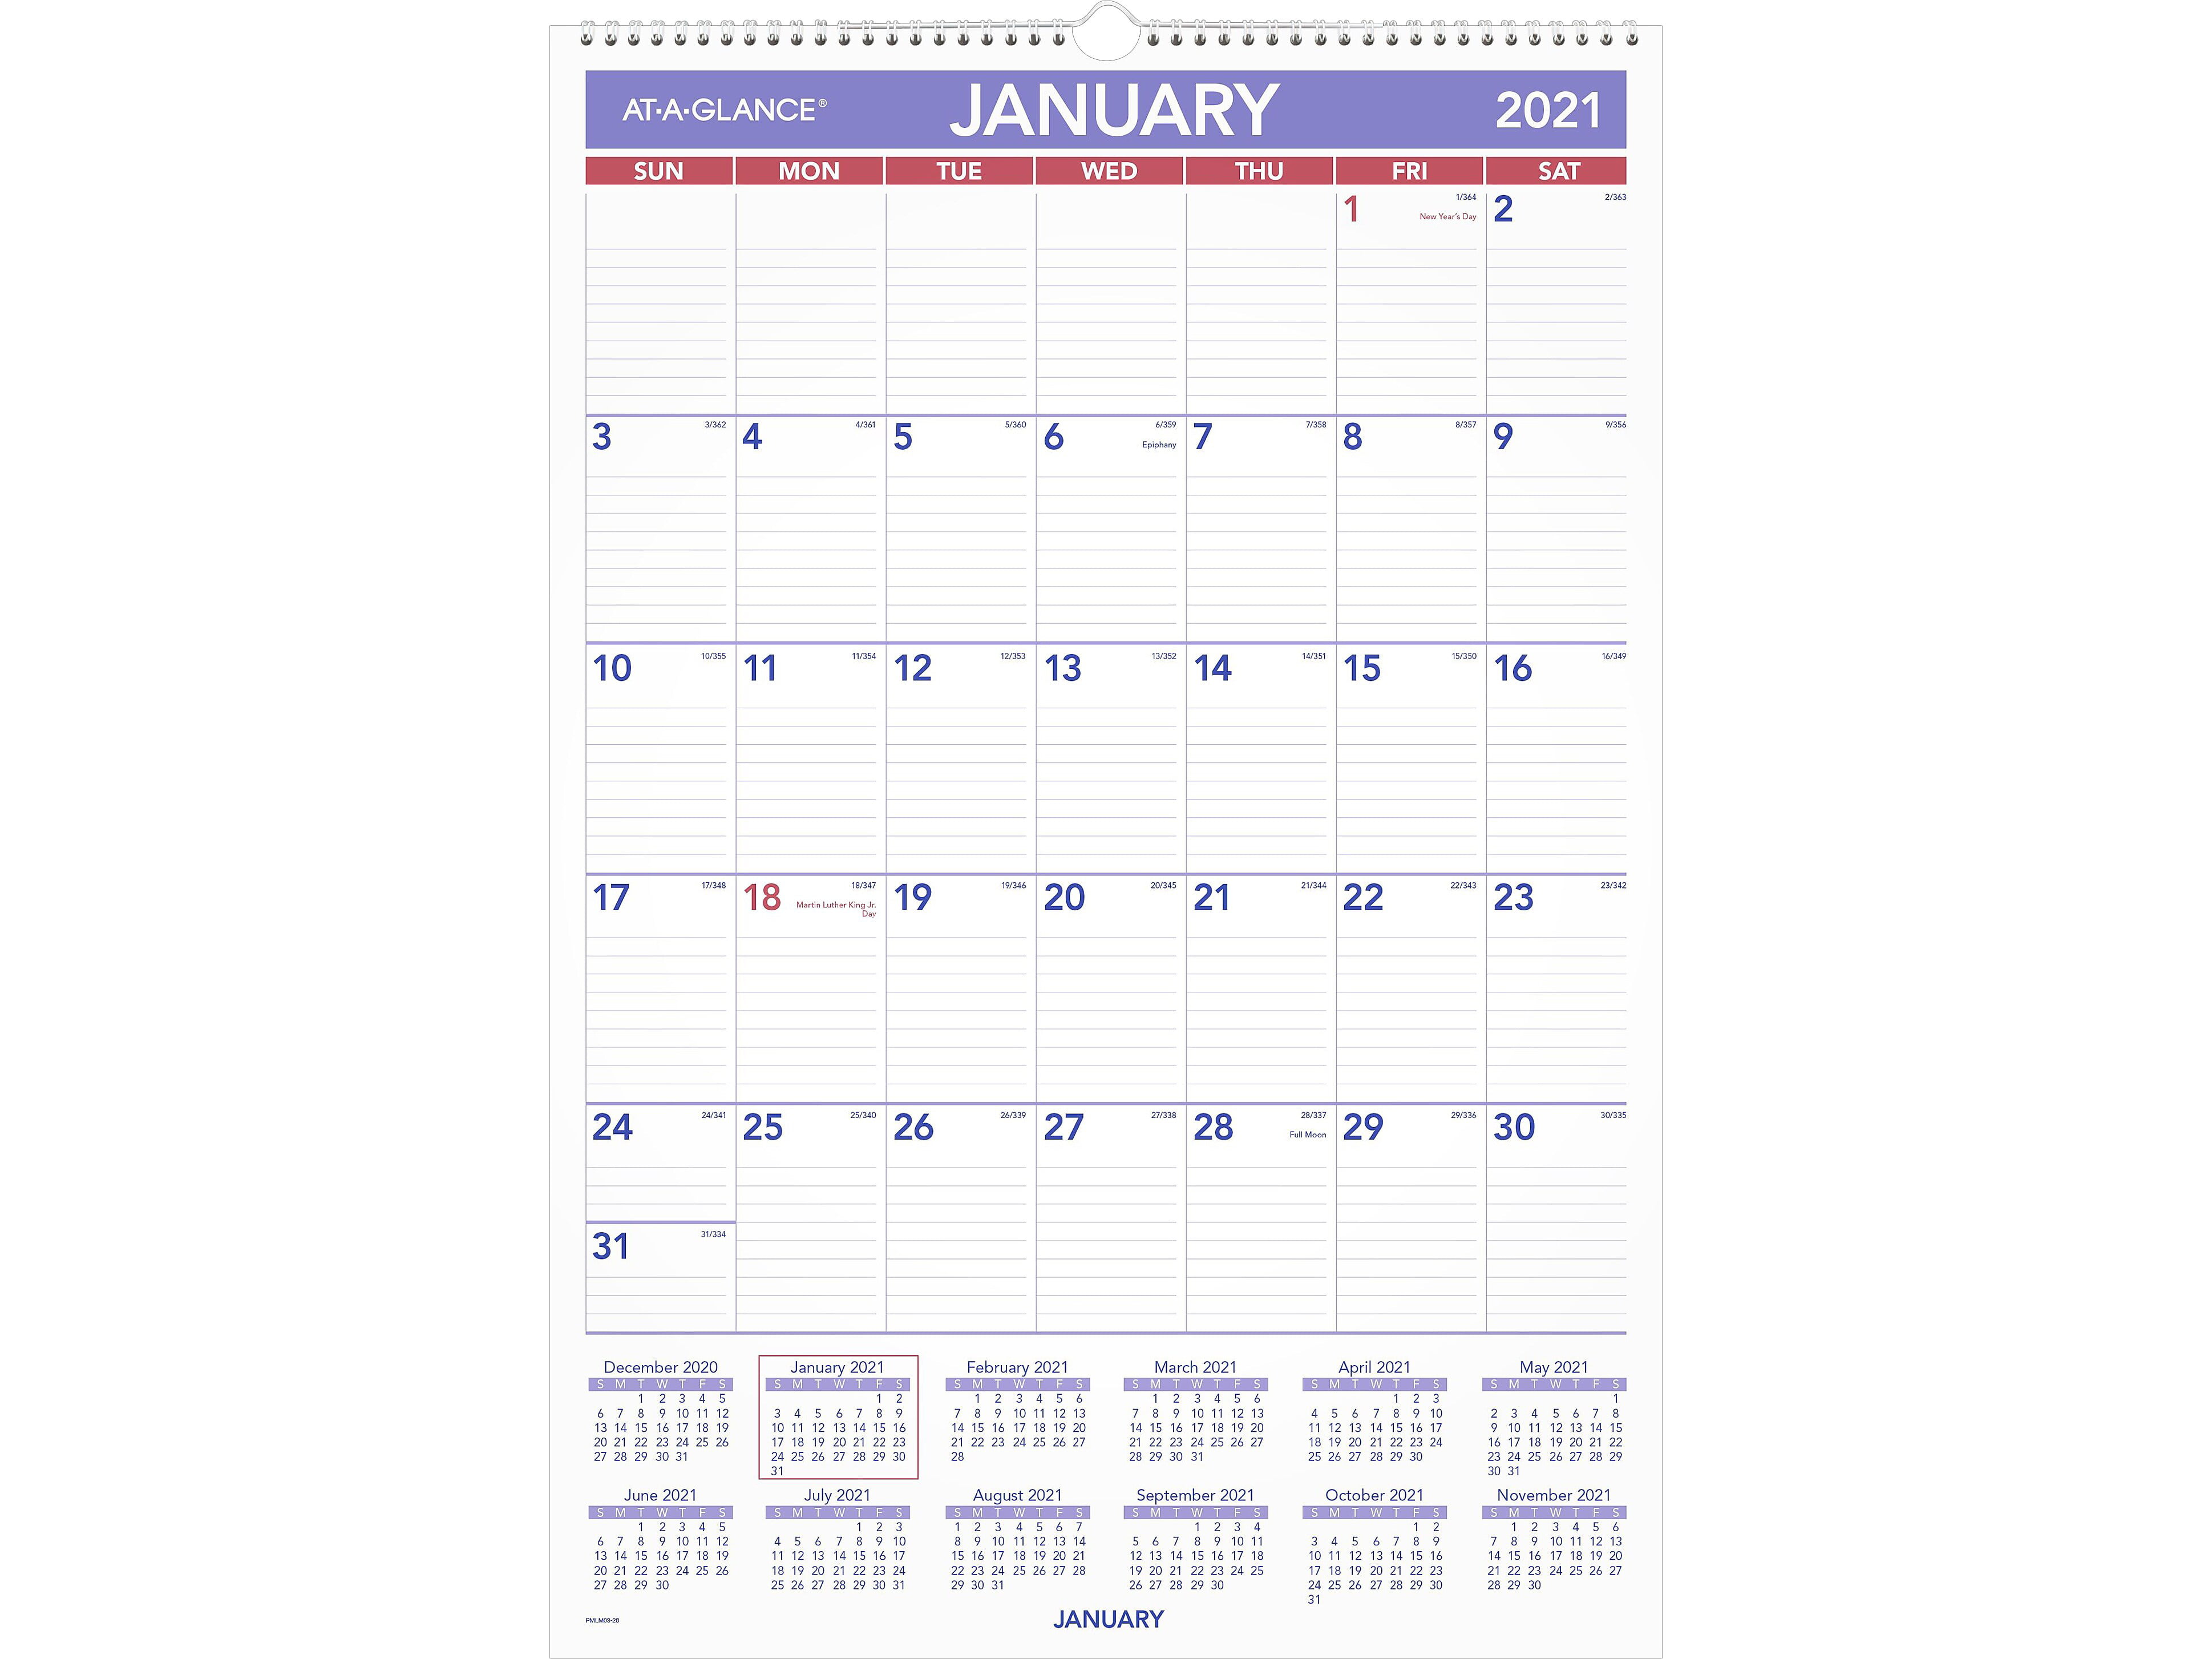 2021 Wall Calendar by AT-A-GLANCE Monthly 15 x 12 DMWTE82821 Tropical Escape Medium 